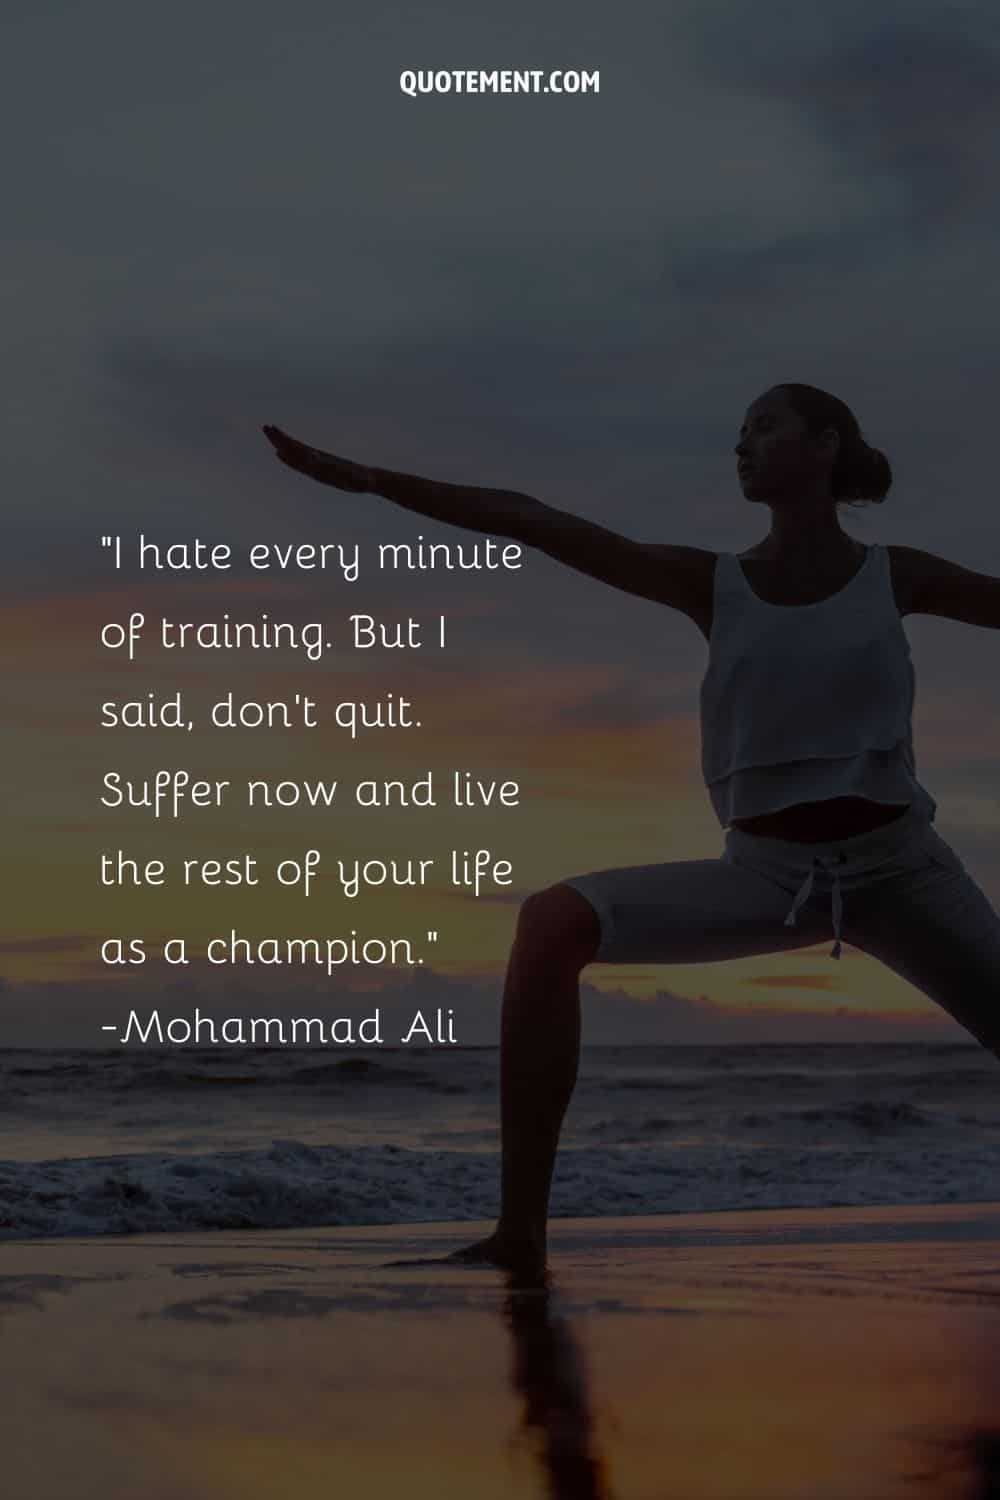 I hate every minute of training. But I said, don’t quit. Suffer now and live the rest of your life as a champion